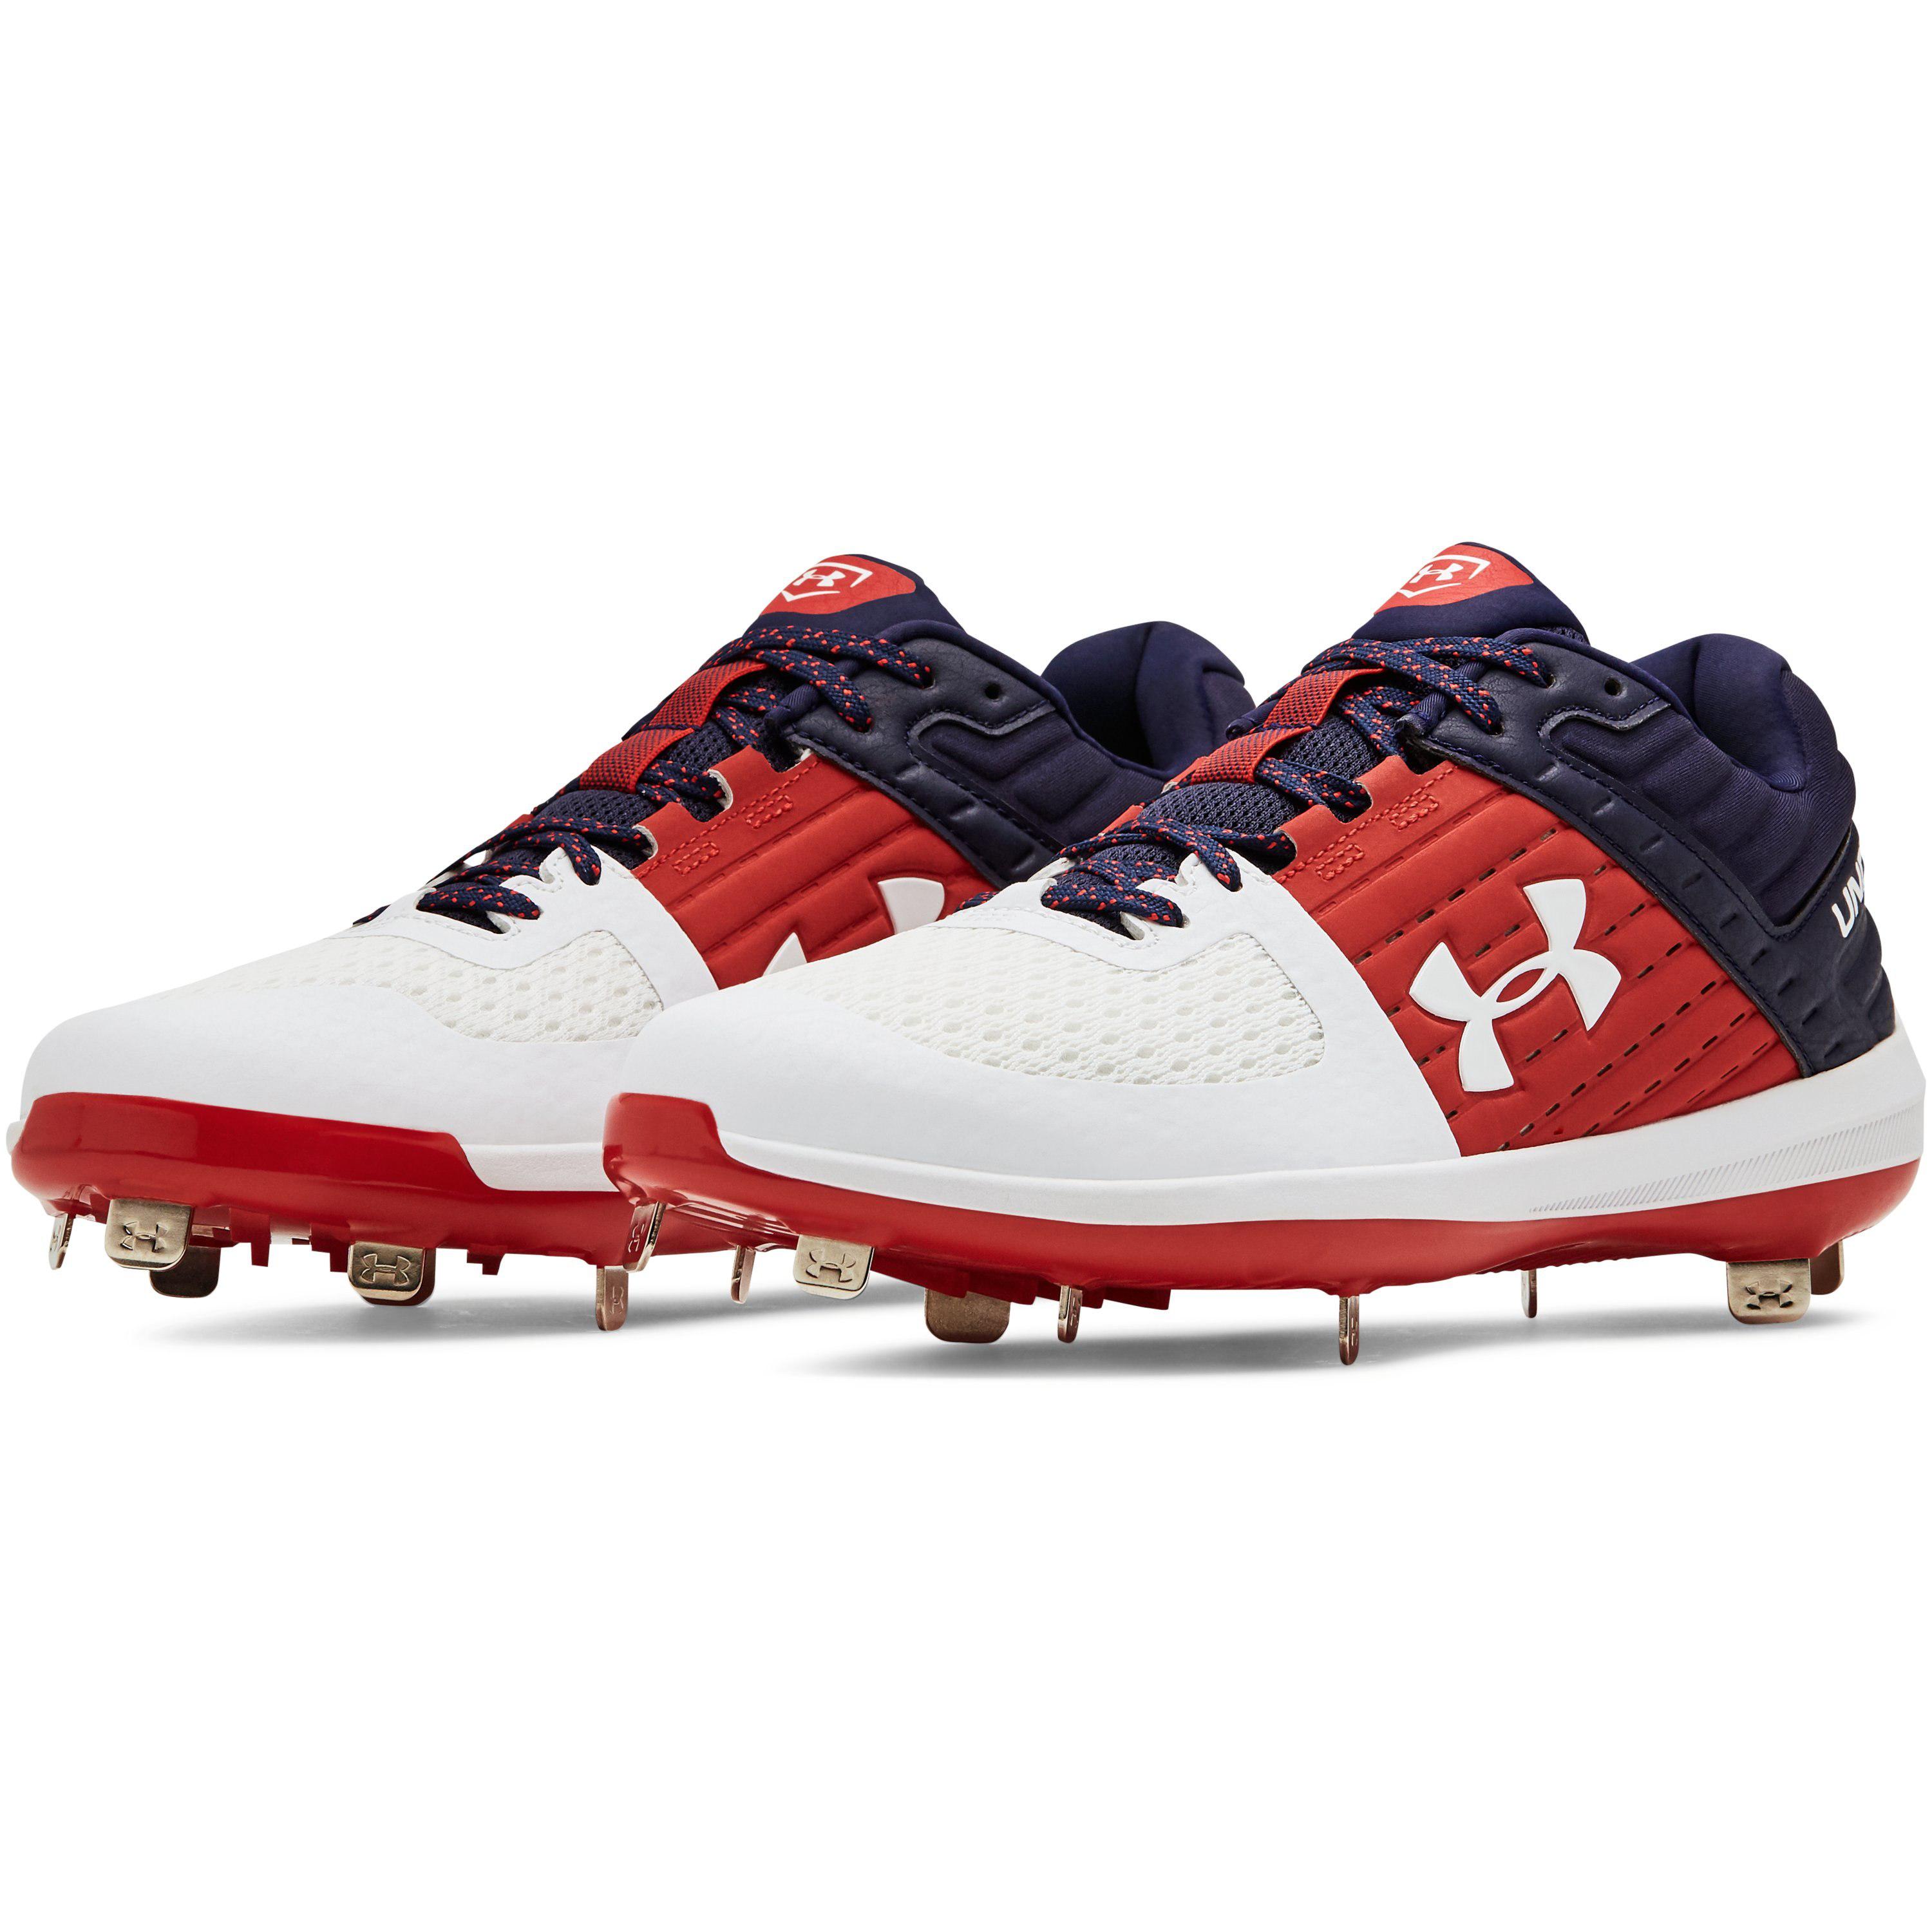 Under Armour 1240652 Mens UA Yard Mid St Baseball Cleats for sale online Choose Sz/color 